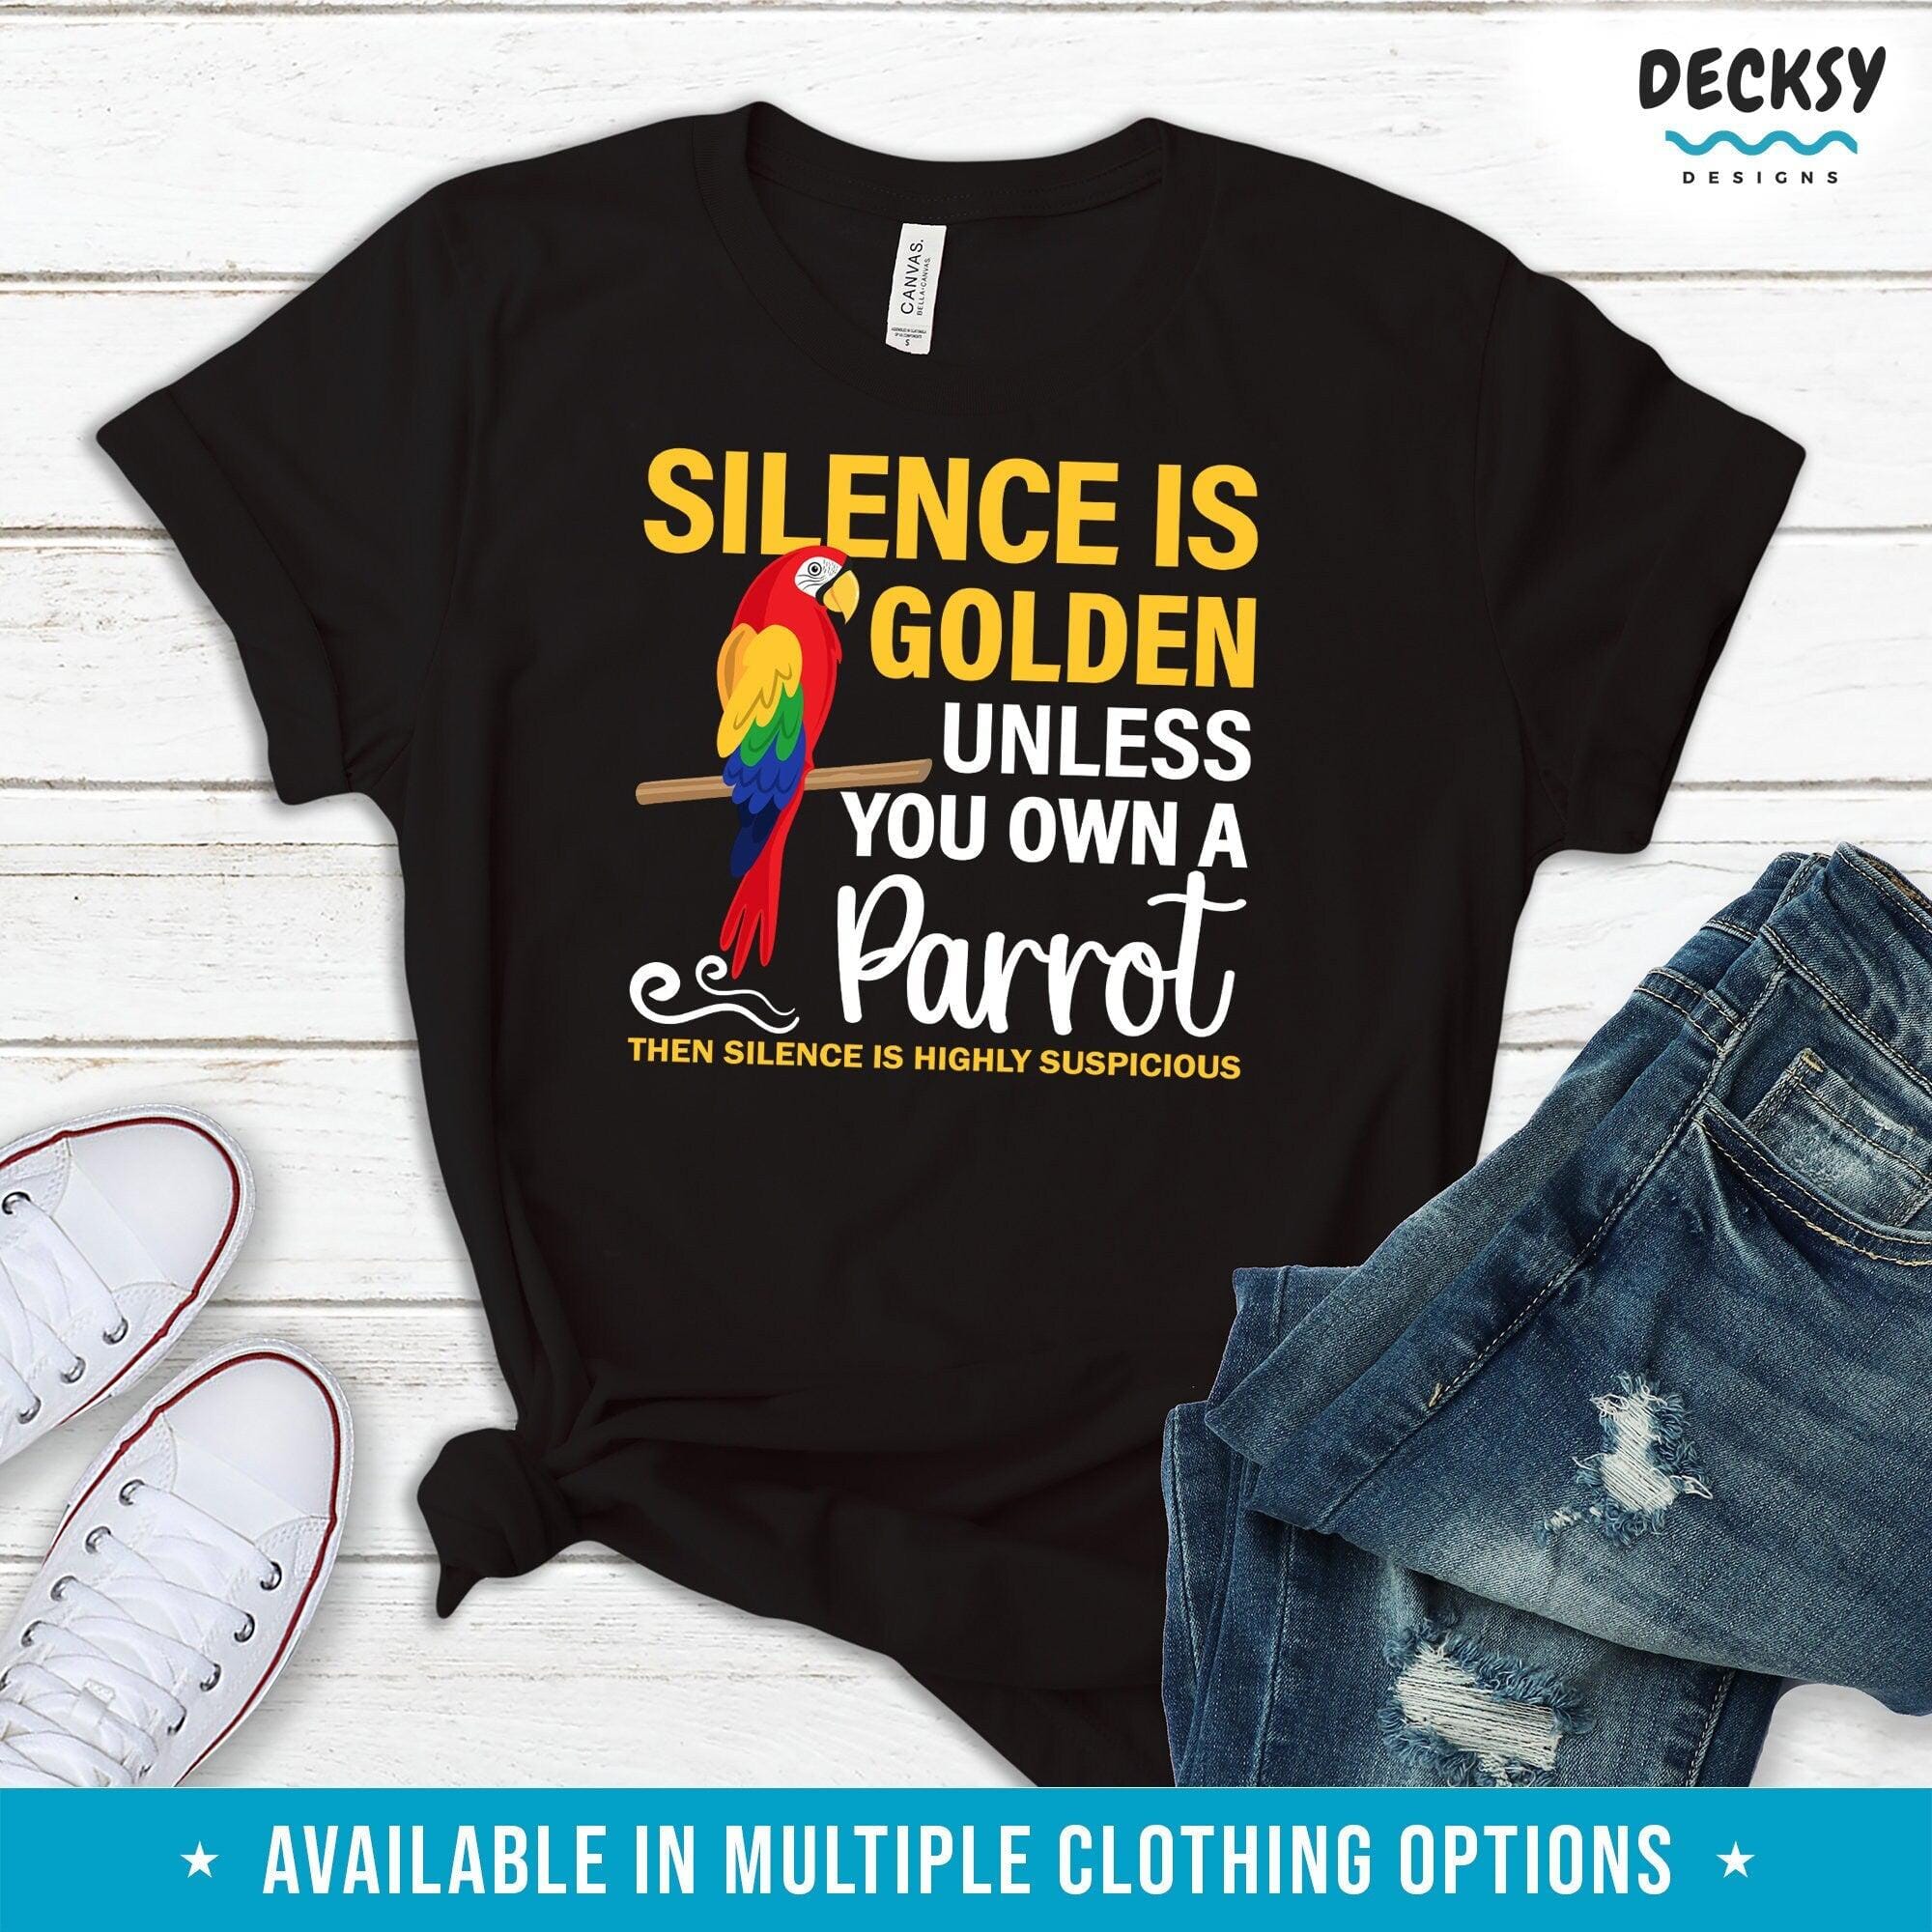 Parrot Shirt, Bird Lover Gift-Clothing:Gender-Neutral Adult Clothing:Tops & Tees:T-shirts:Graphic Tees-DecksyDesigns